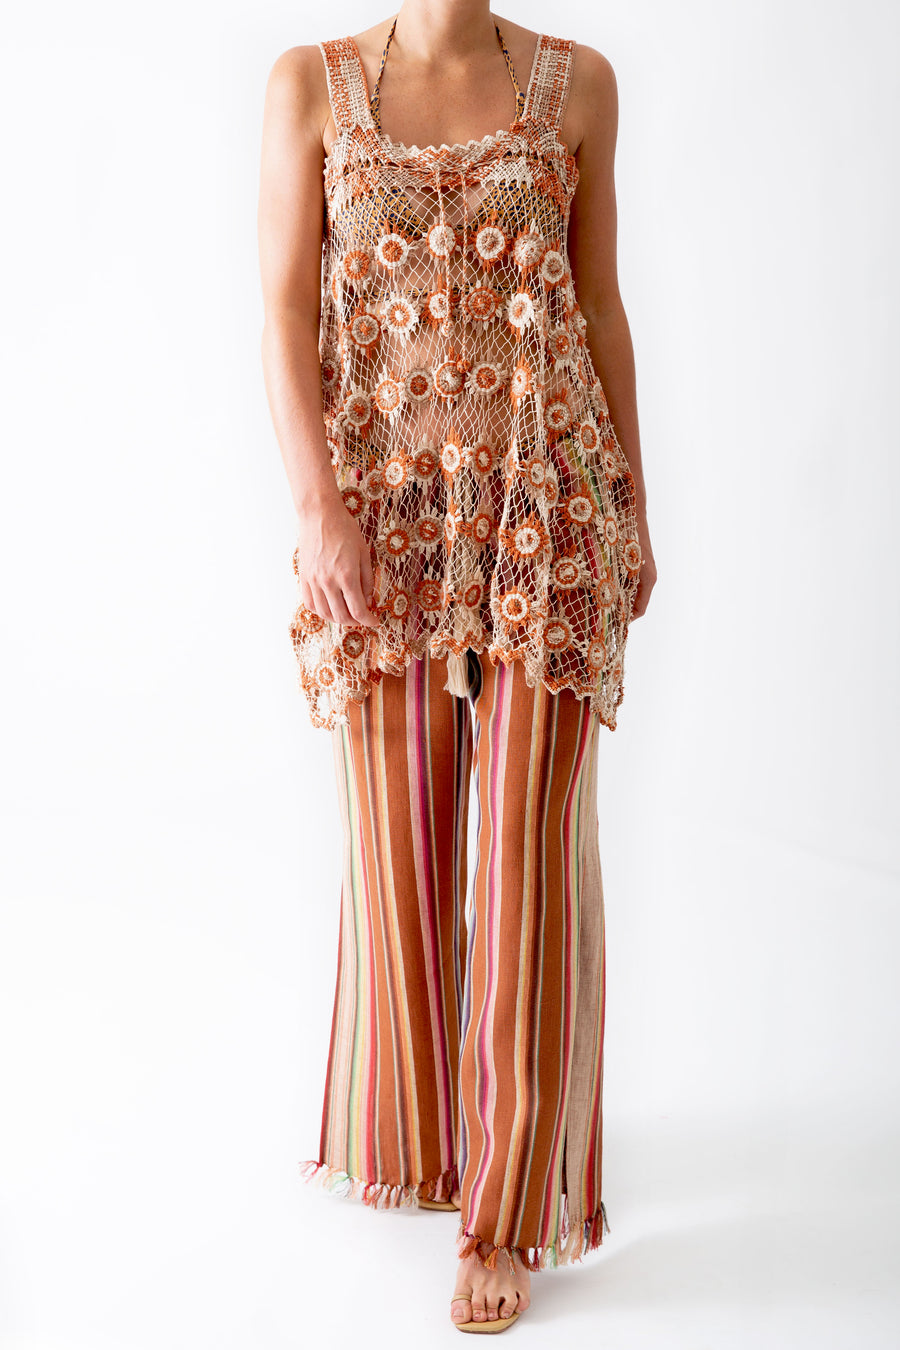 Vana Filet Lace Coverup in Rust